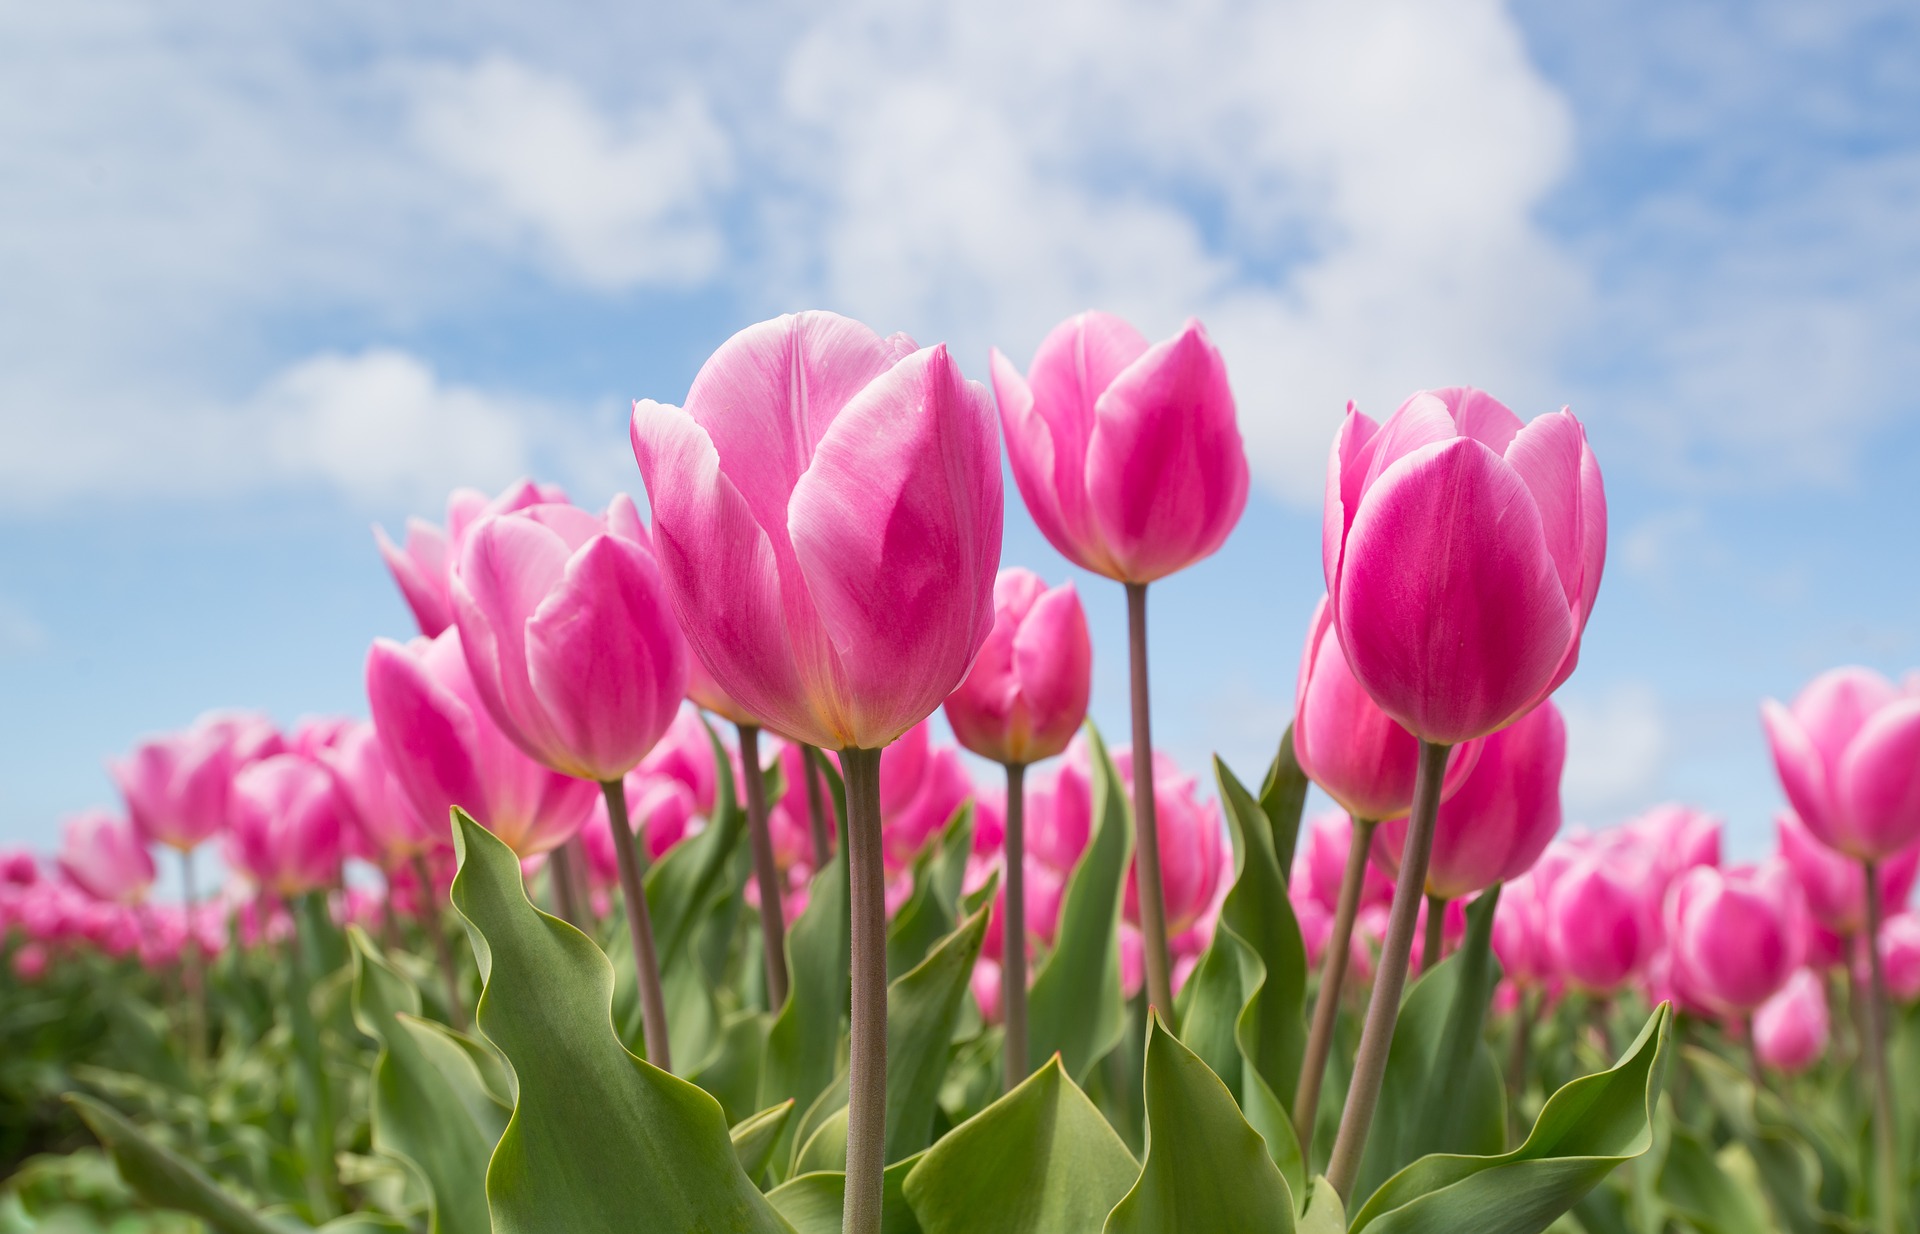 tulips-g2ef88a6be_1920